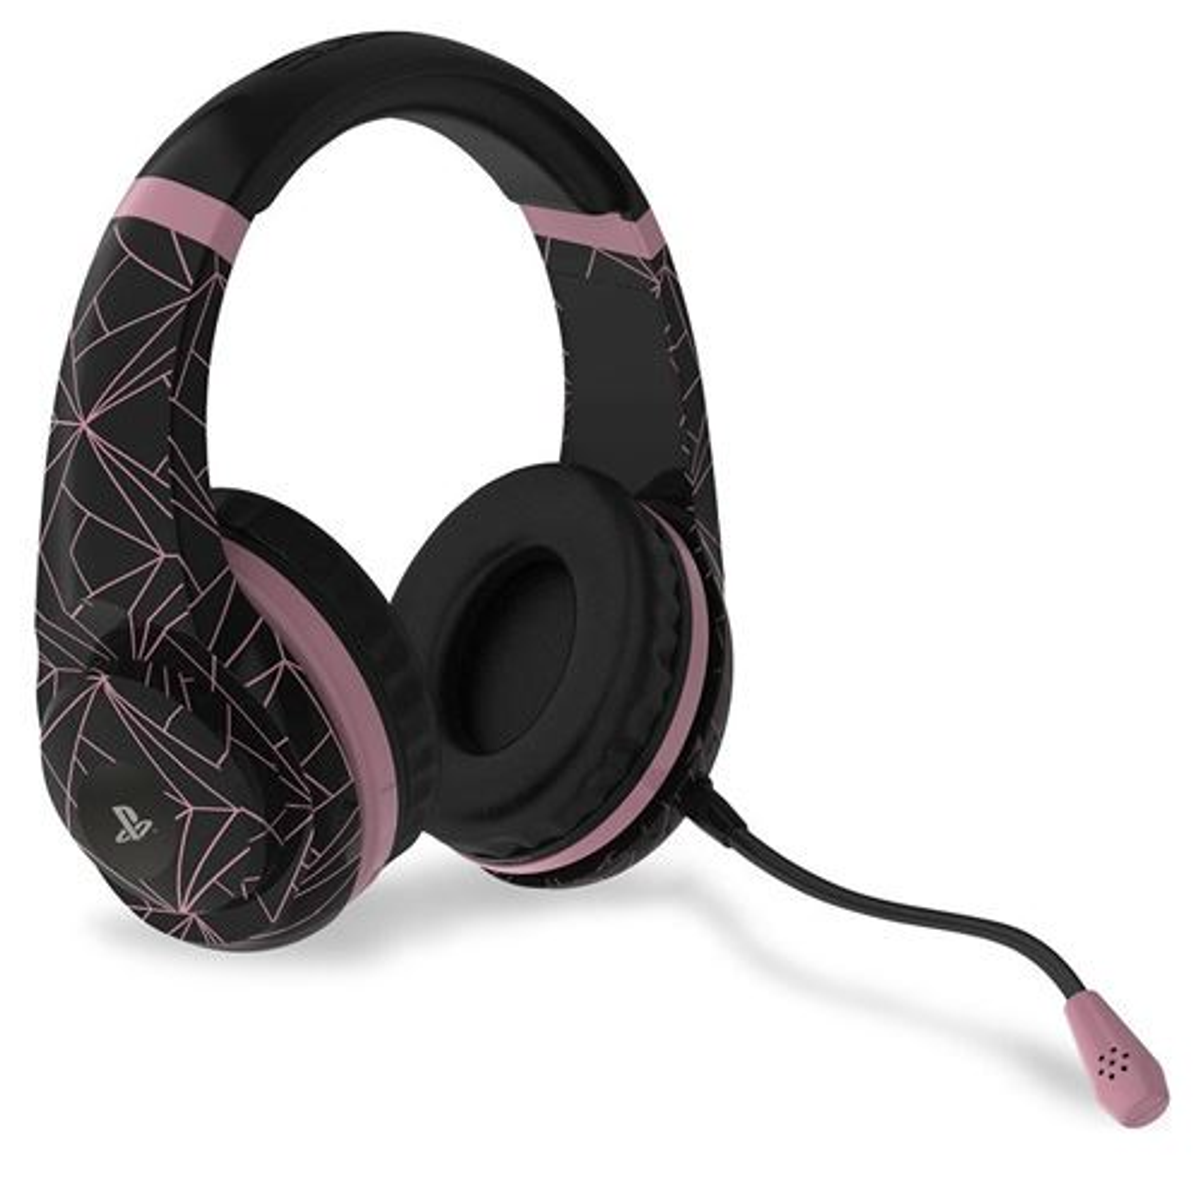 4 GAMERS PRO4-70-RGA BLK HEADSET Gaming Schwarz/Roségold ROSE GOLD.ED.-ABSTRACT, Headset On-ear